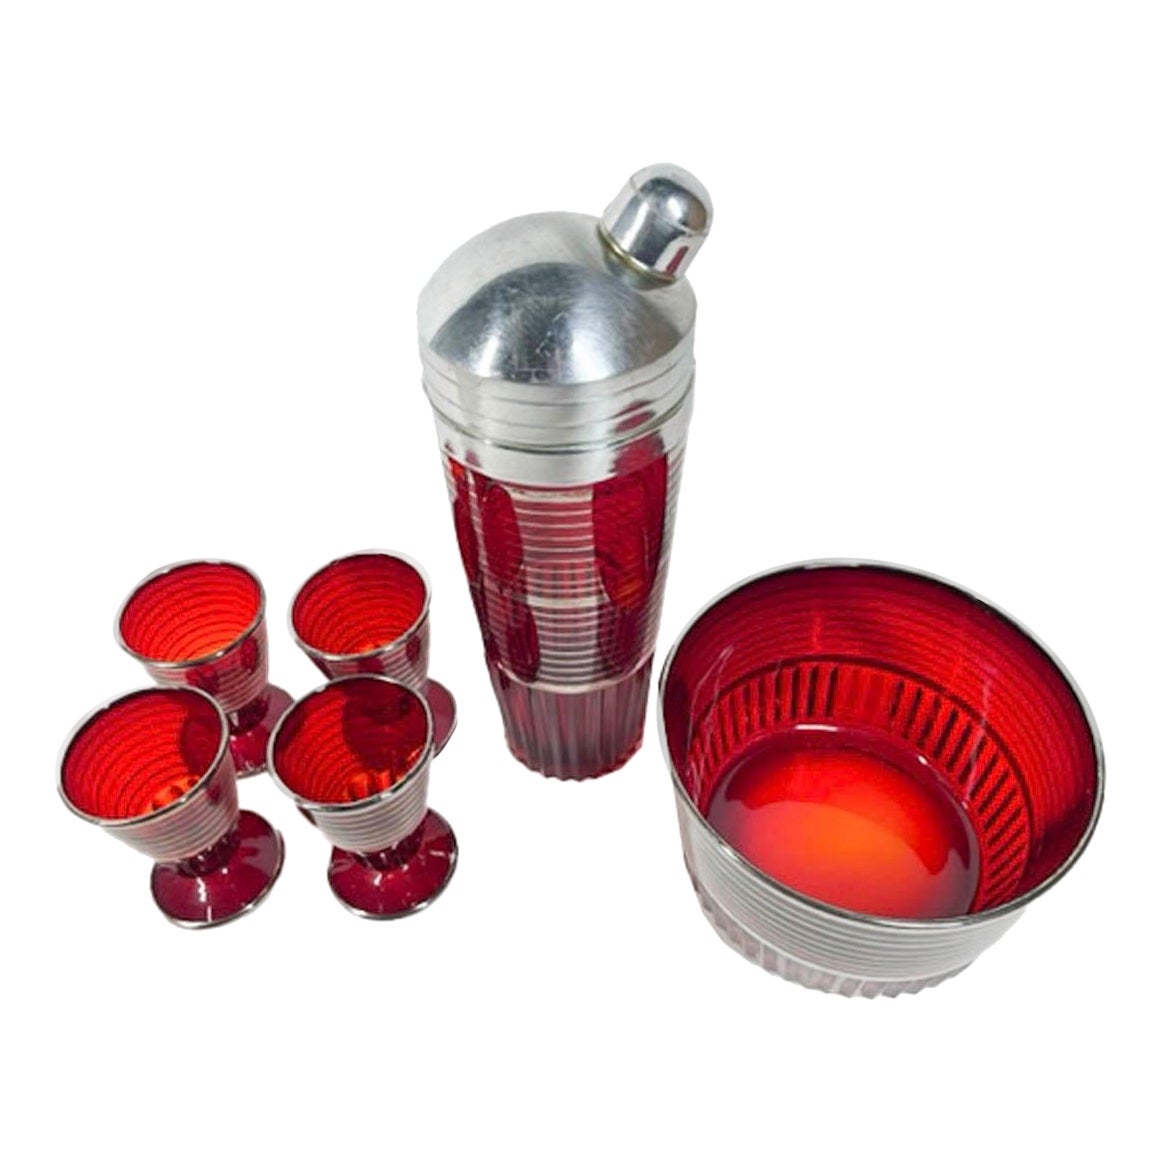 Art Deco, Paden City Glass, Cocktail Shaker Set in Ruby Glass W/Silver Bands